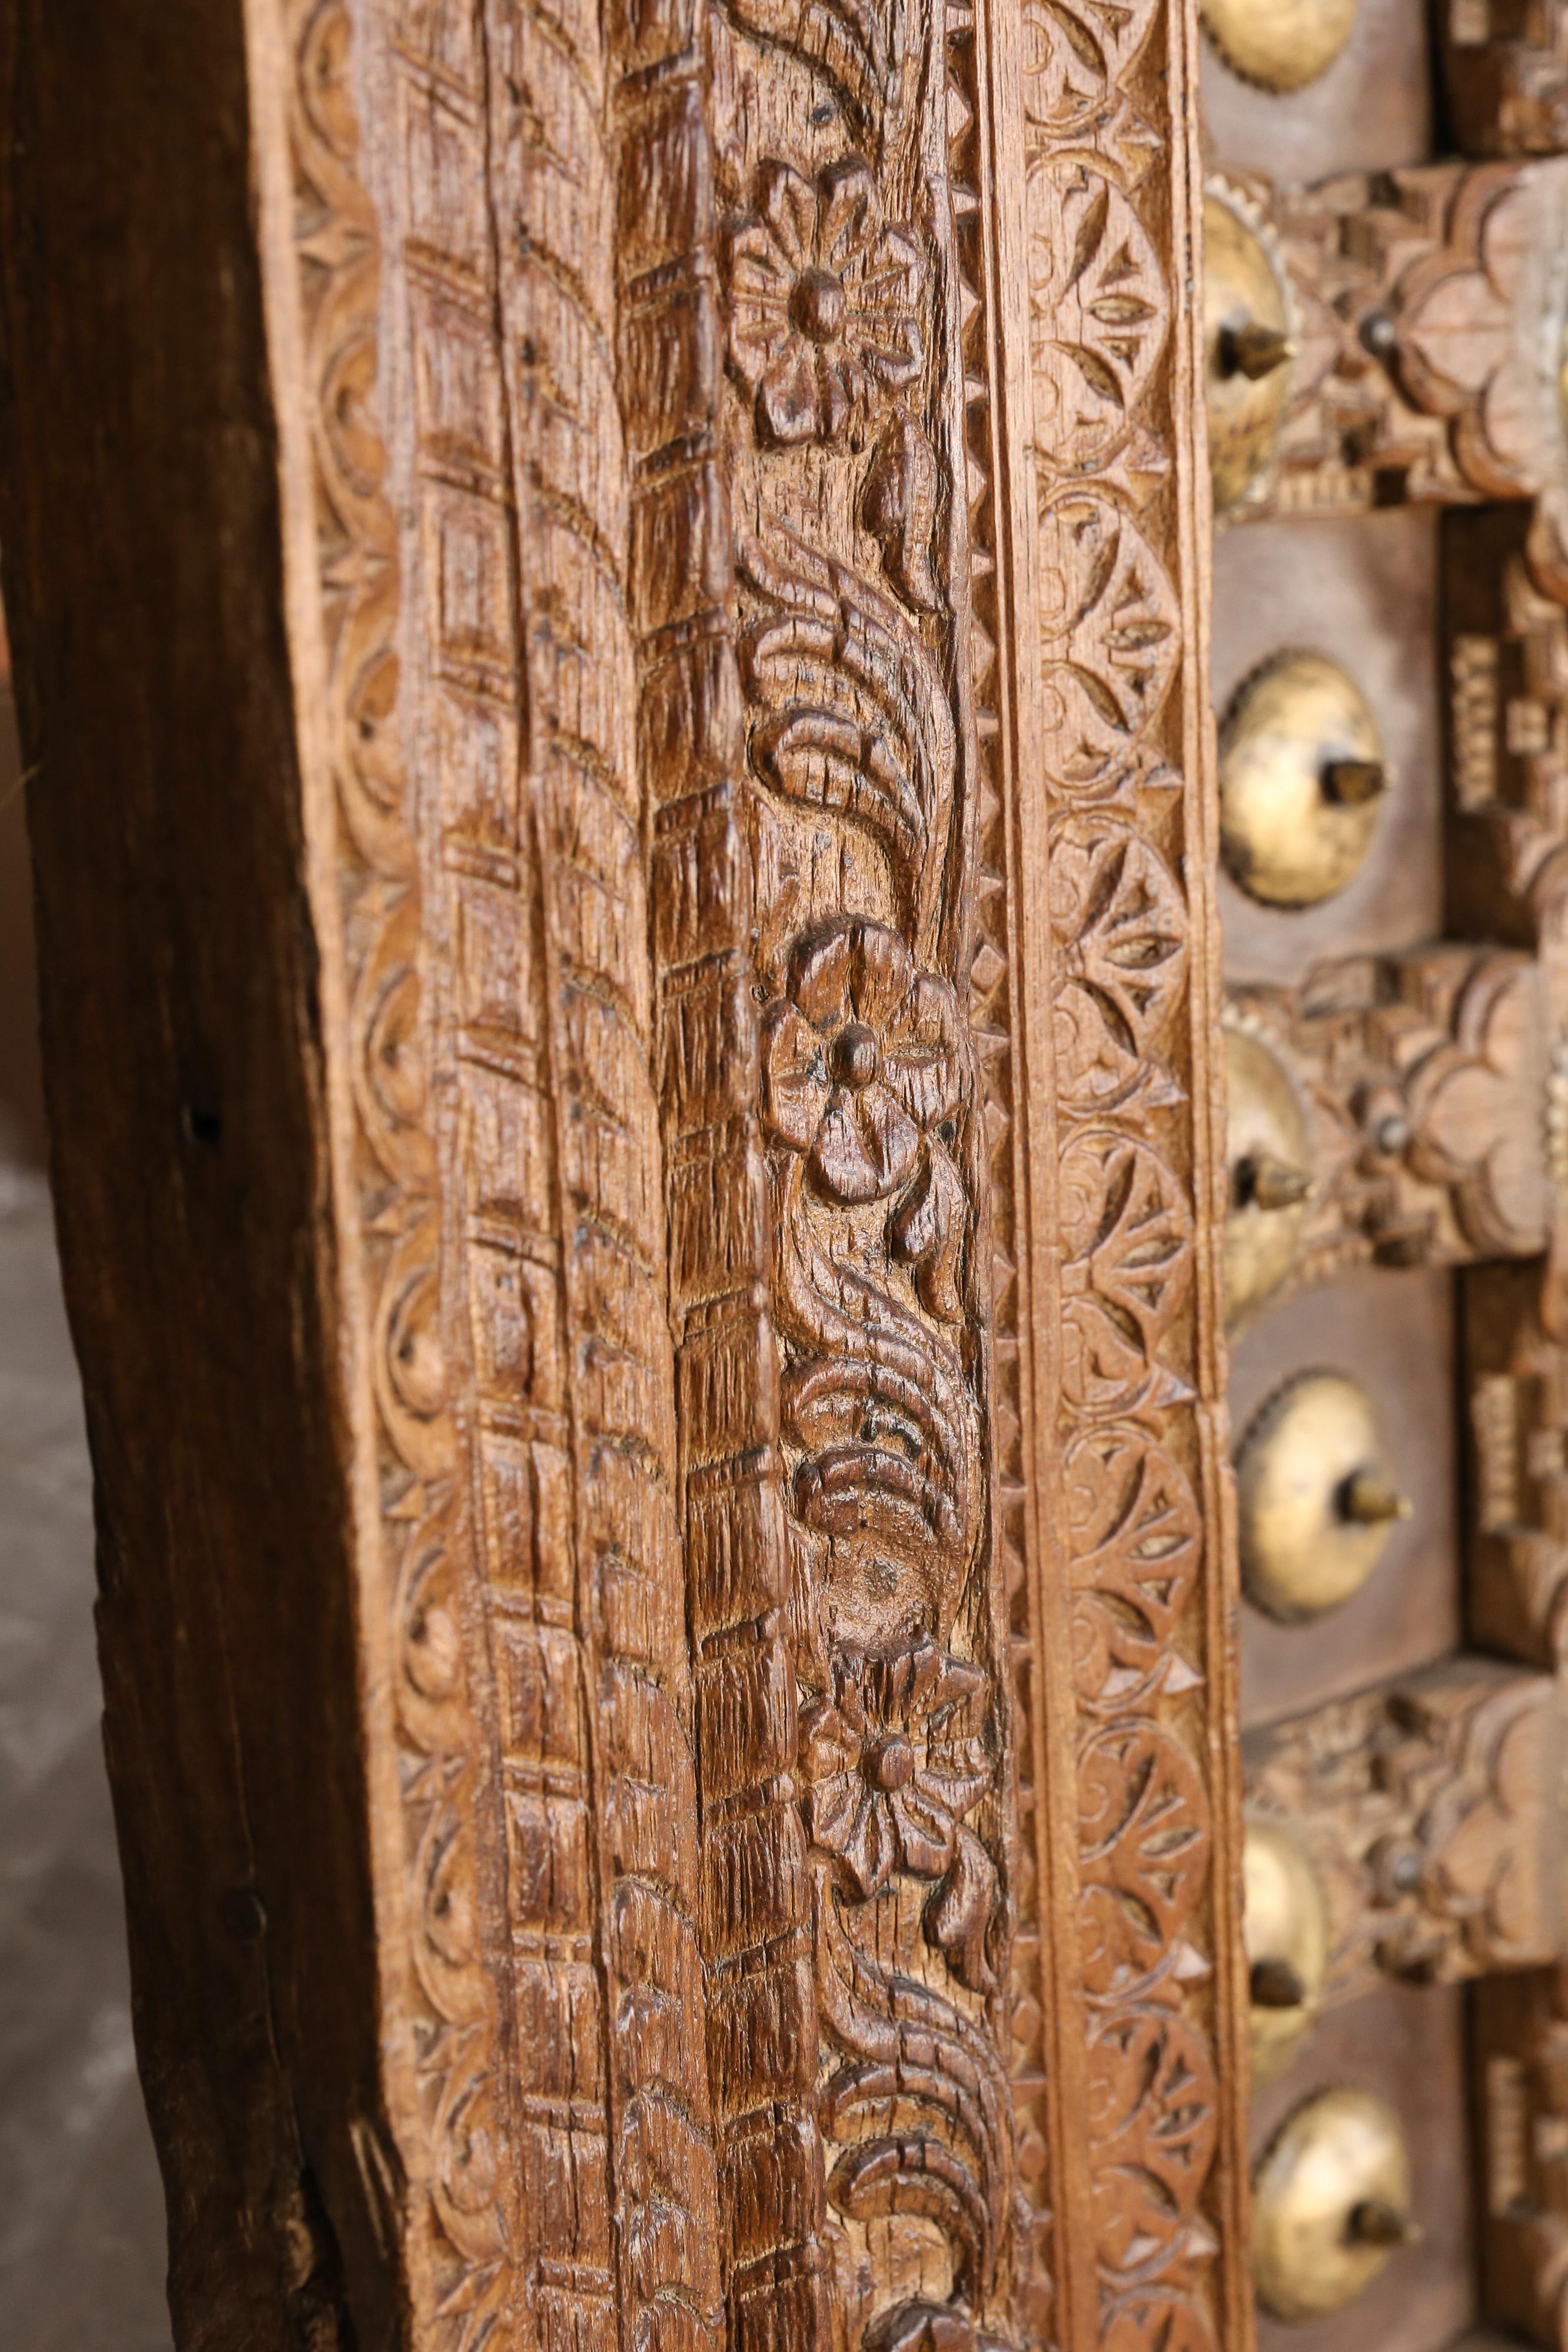 Anglo Raj Metal Studded Highly Carved Solid Teak Wood Entry Door of a Temple Priest Home